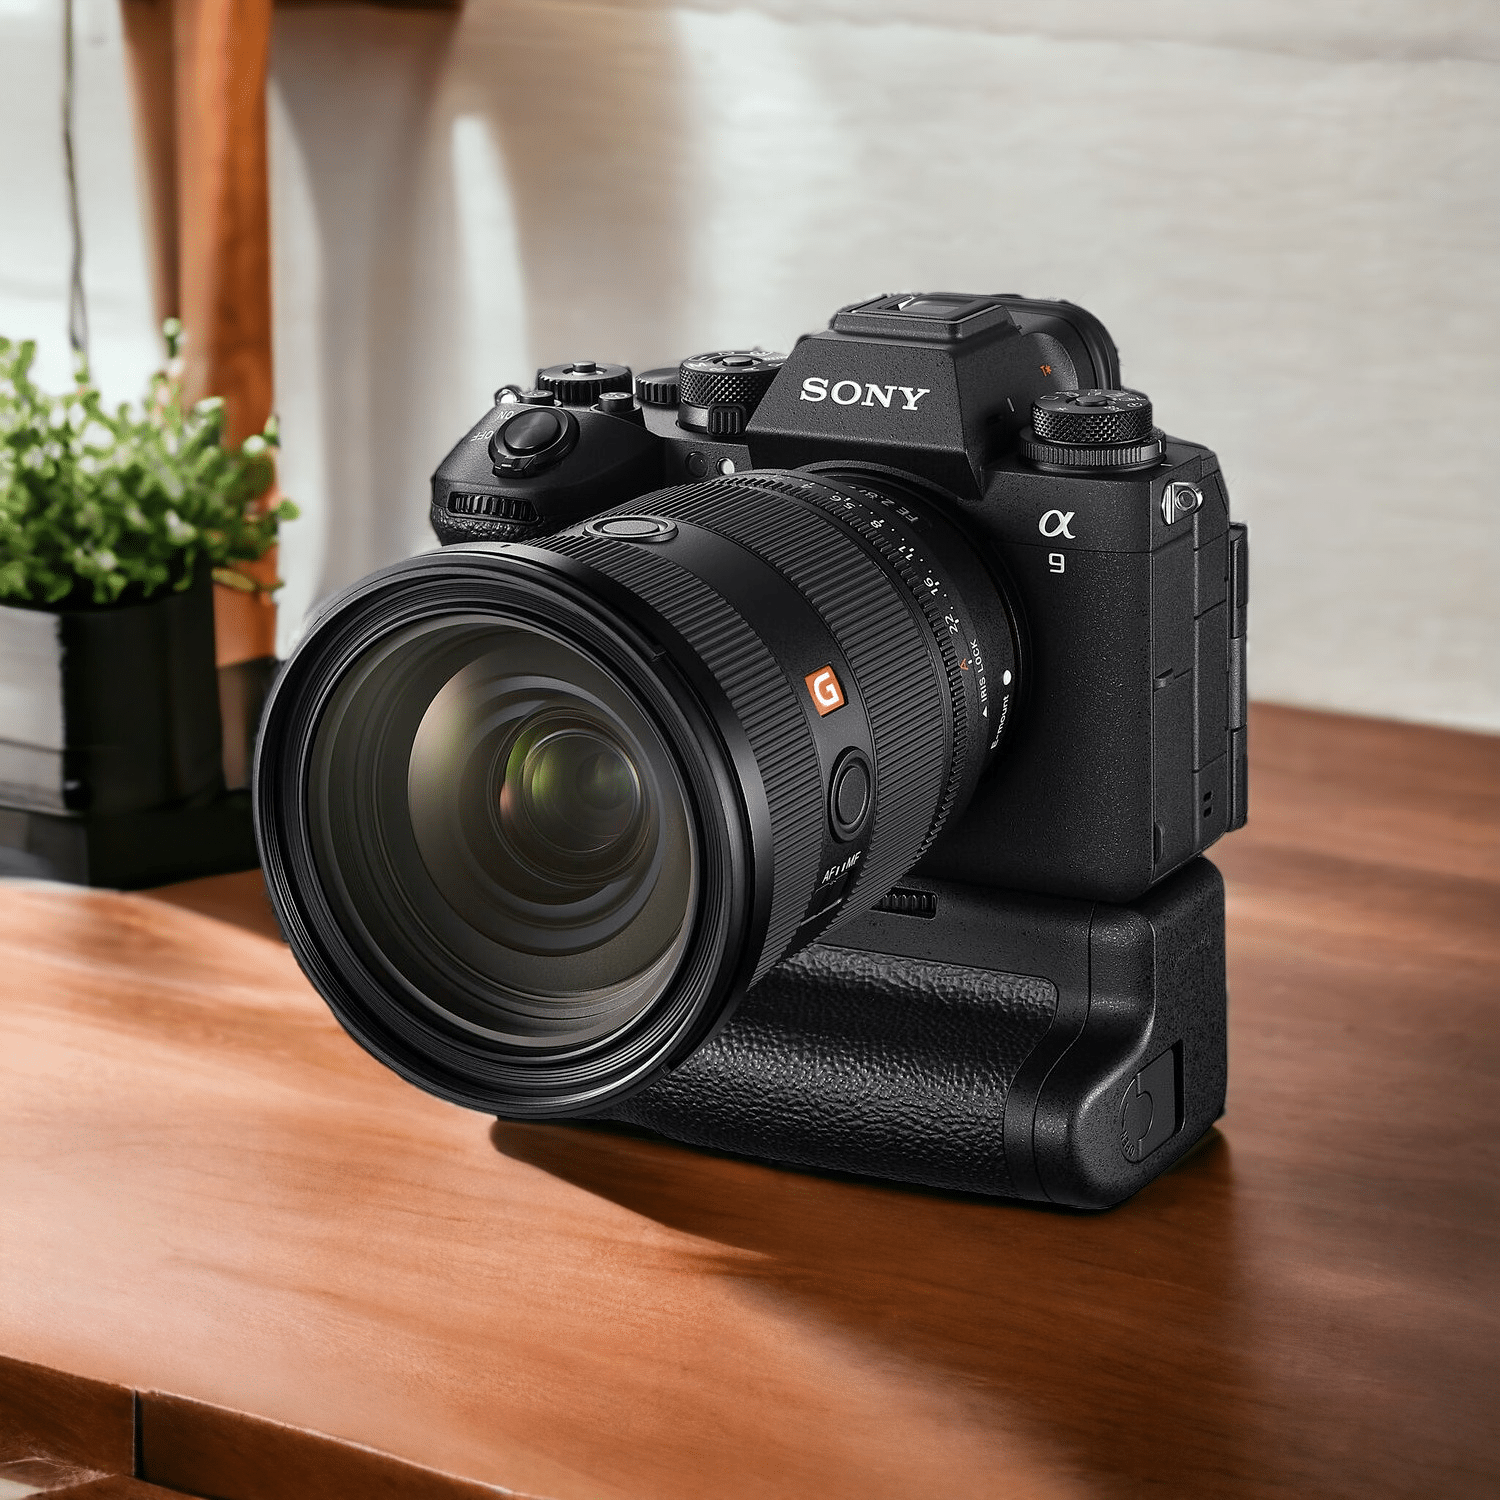 Le Sony A9 III et son grip additionnel